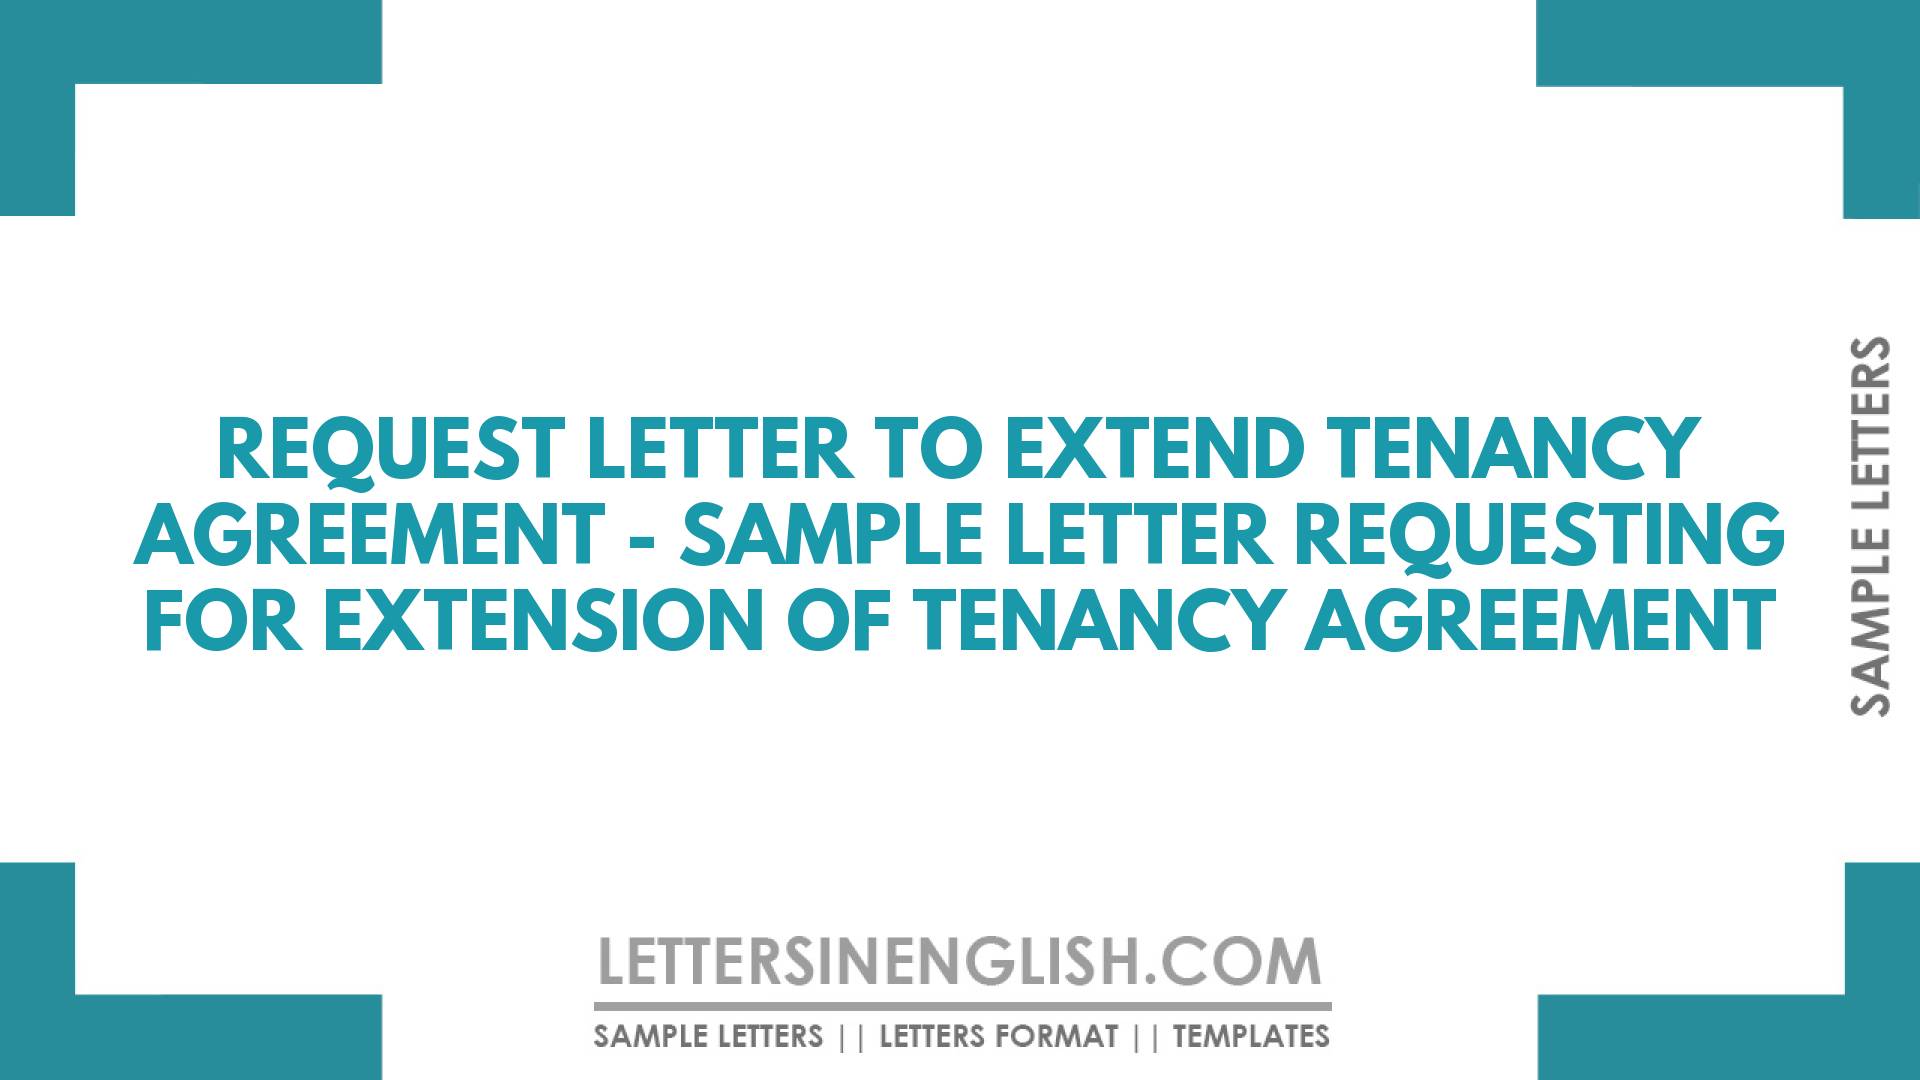 Request Letter to Extend Tenancy Agreement – Sample Letter Requesting for Extension of Tenancy Agreement